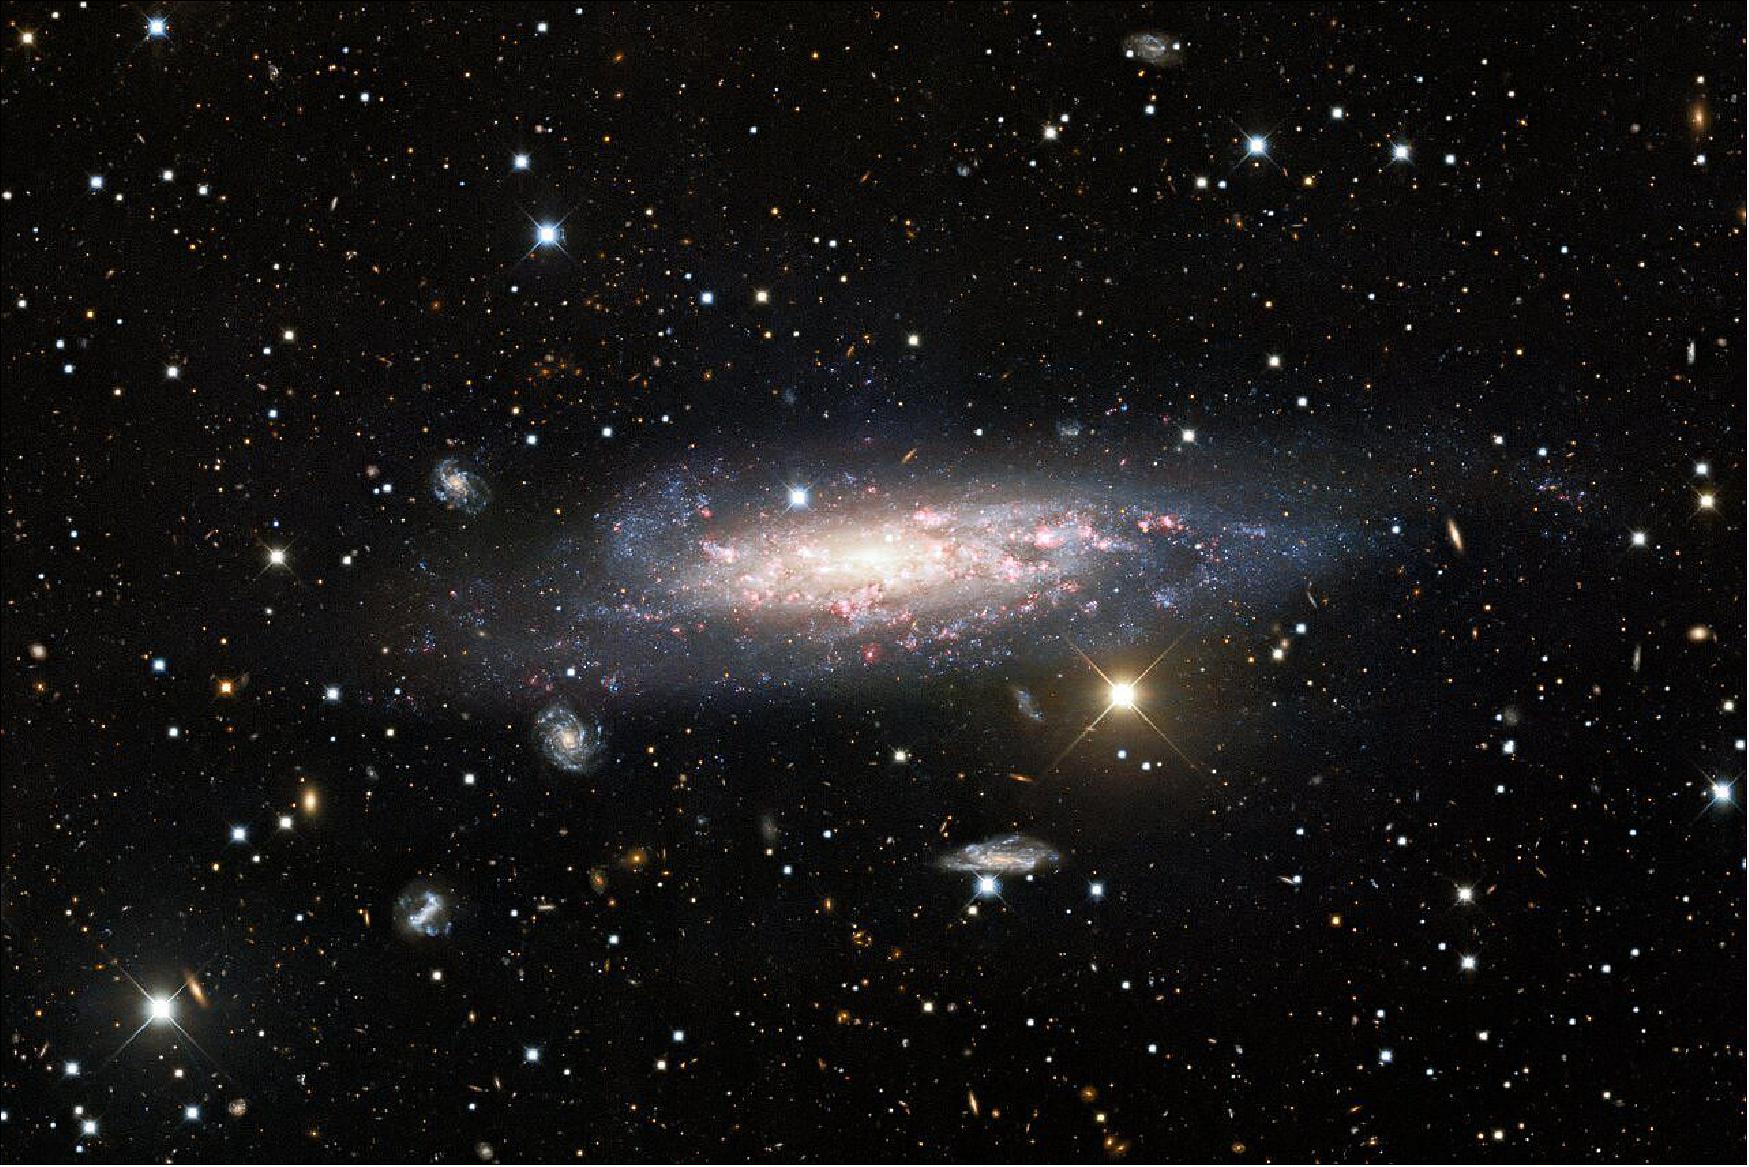 Figure 35: A stunning long-exposure observation from the Kitt Peak National Observatory reveals the spiral galaxy NGC 1003 in glorious detail. The deep observation also shows a treasure trove of background galaxies spread throughout the image (image credit: NSF/NOIRLab)